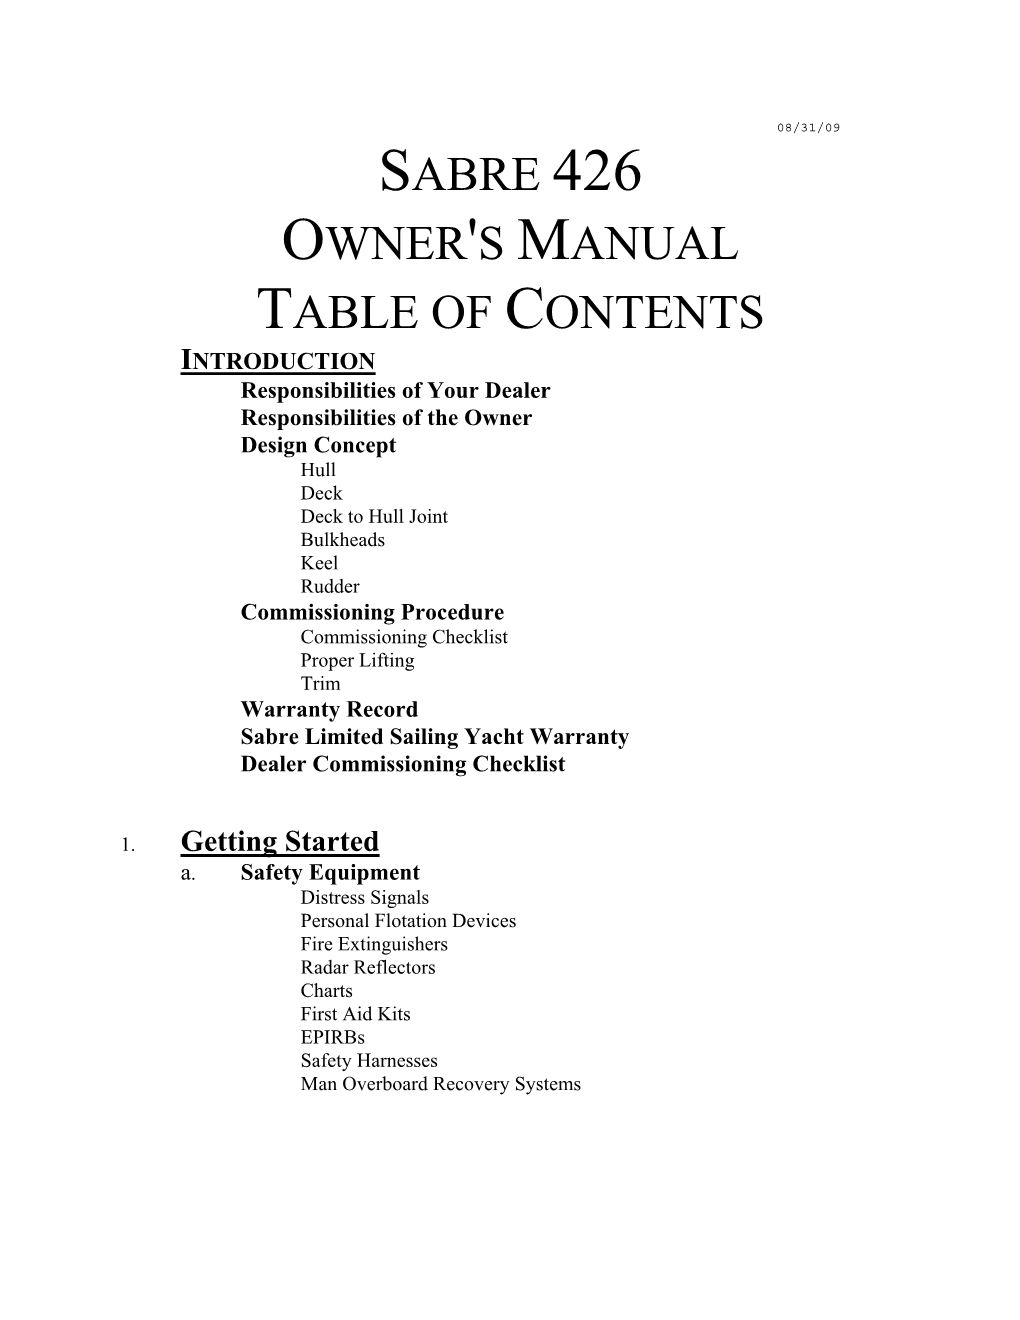 Sabre 426 Owner's Manual Table of Contents